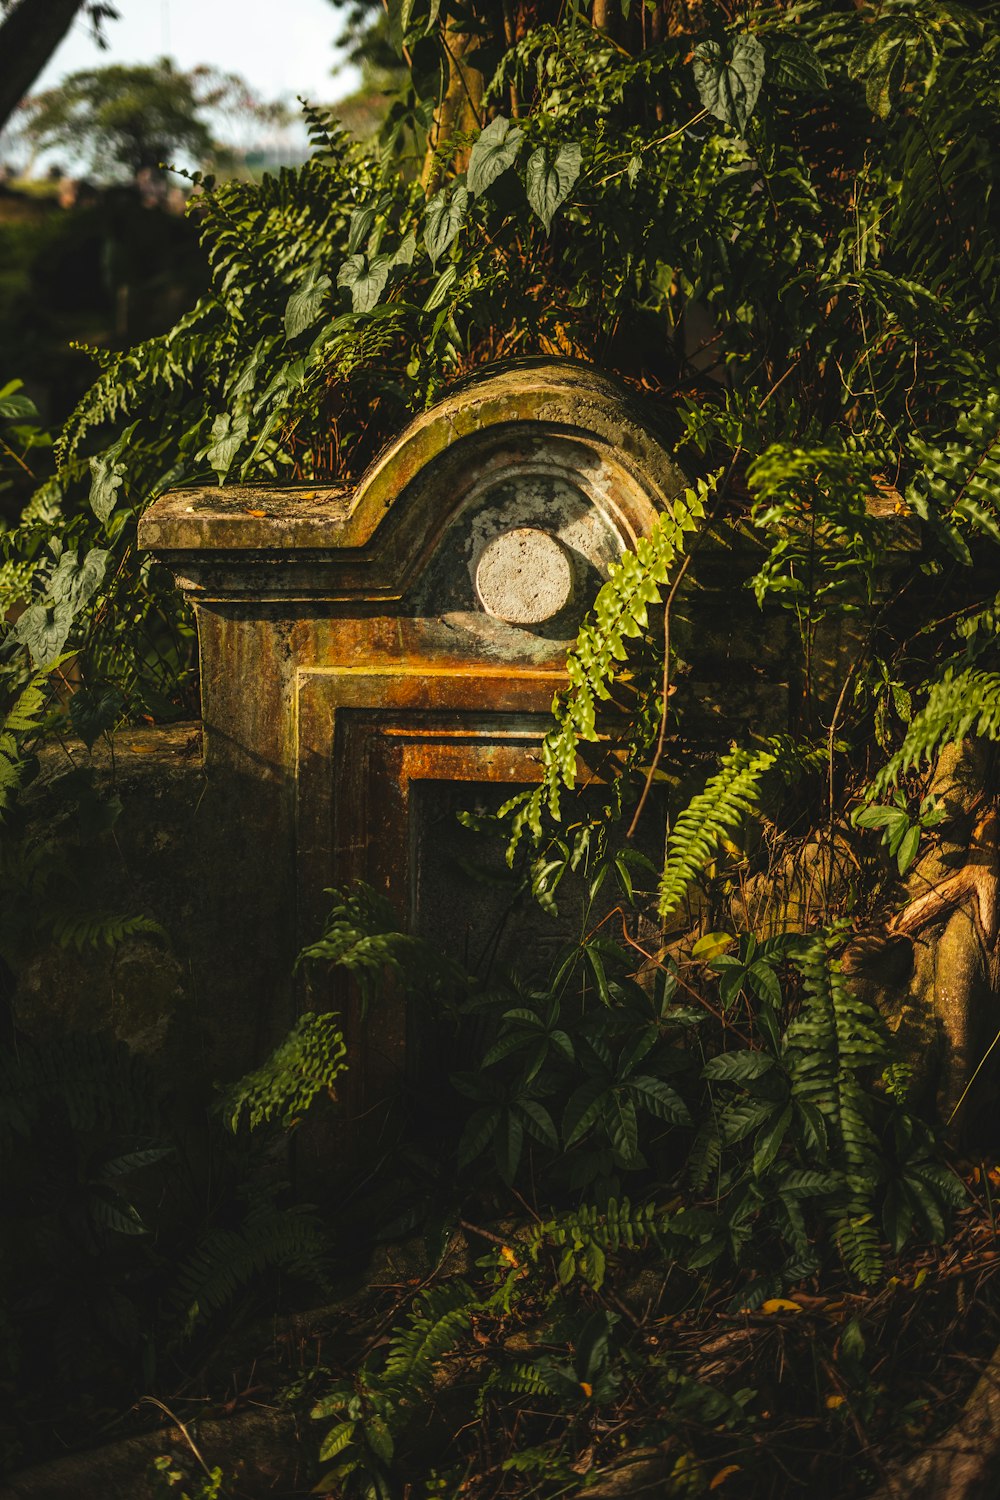 an old clock sitting in the middle of a forest